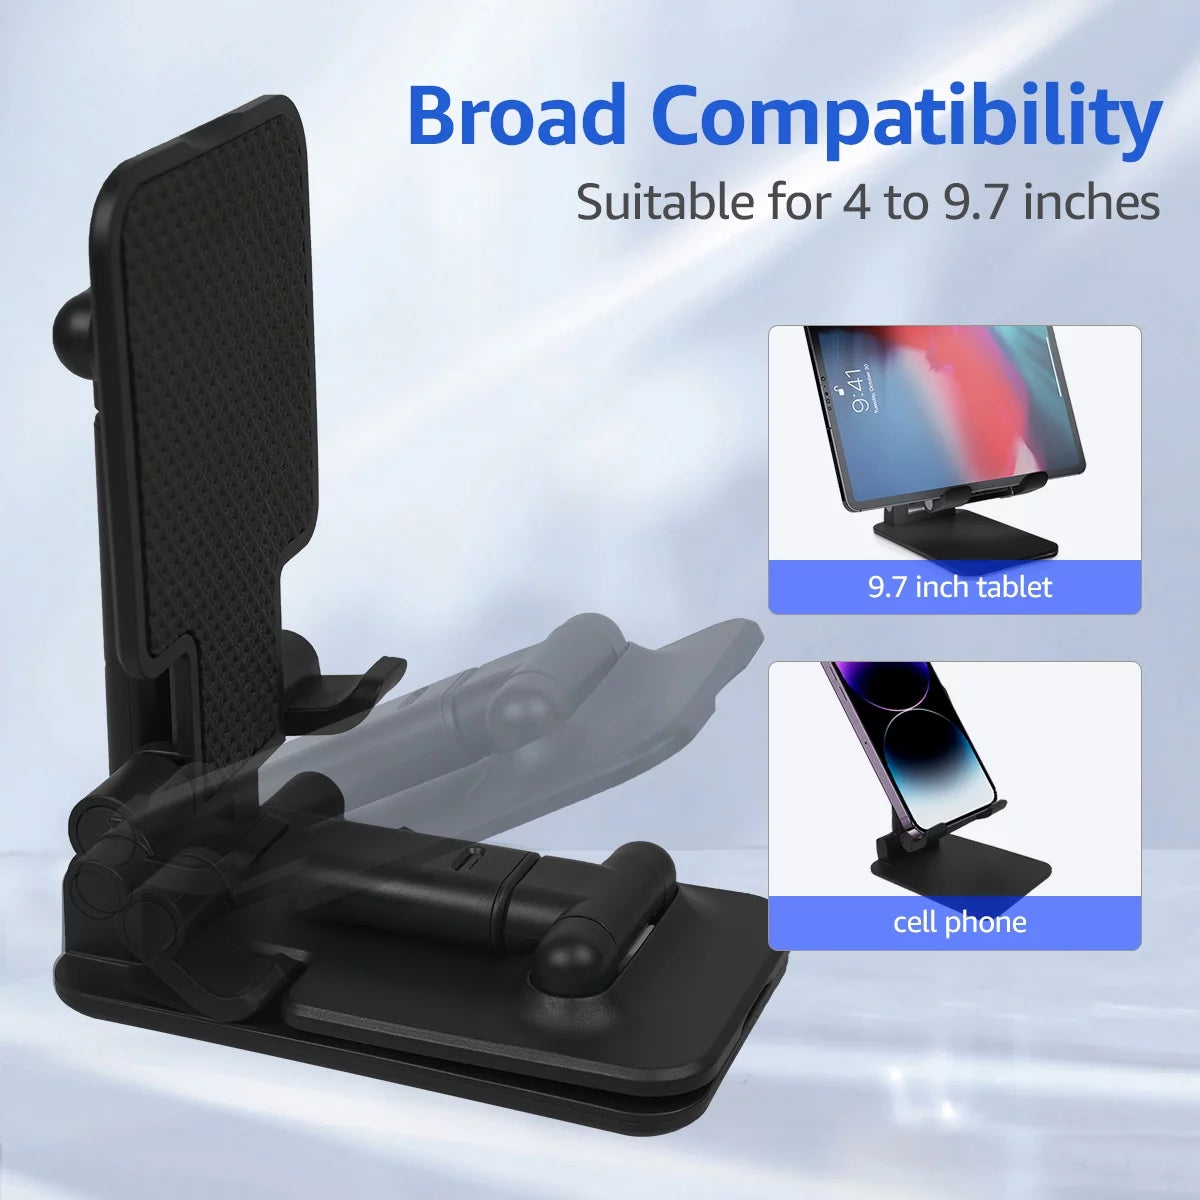 Cell Phone Stand for Desk, Dual Folding Phone Stand, Height Angle Adjustable Desktop Phone Holder, Office Desk Accessorie, Cell Phone Holder Fits All Mobile Phone, Black